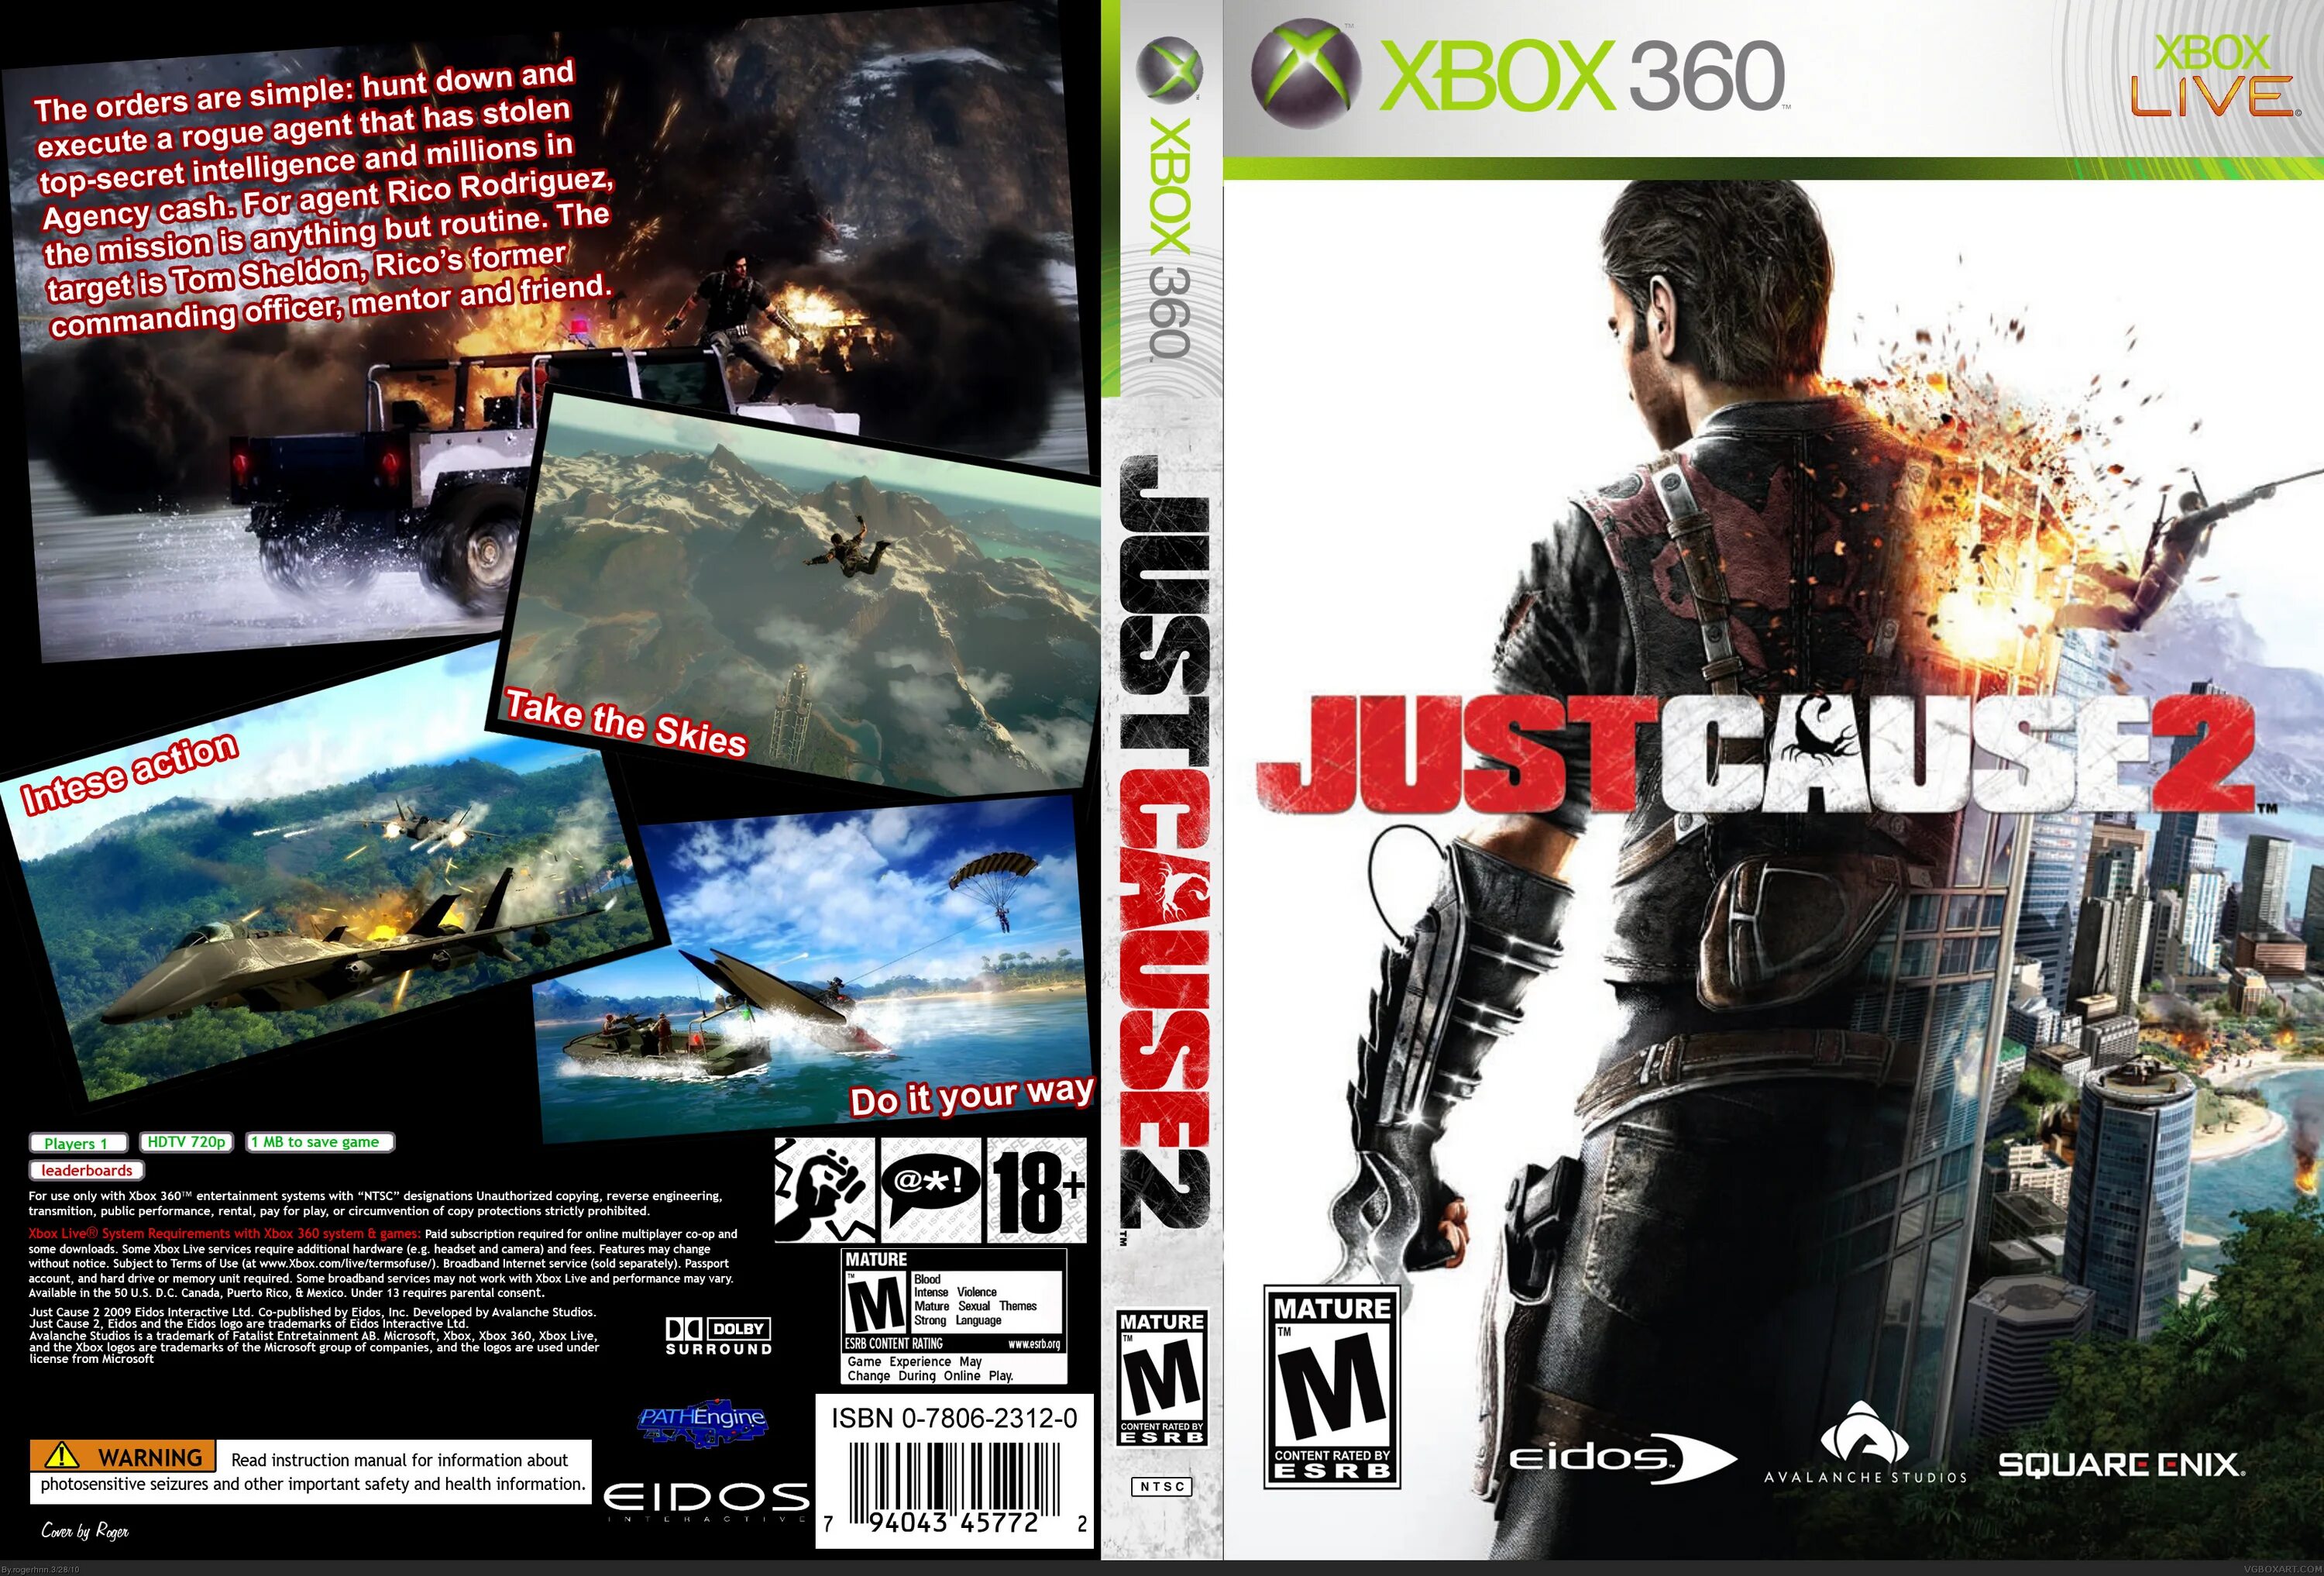 Just cause 2 Xbox 360 обложка. Just cause Xbox 360. Just cause 2 диск. Just cause 1 Xbox 360.